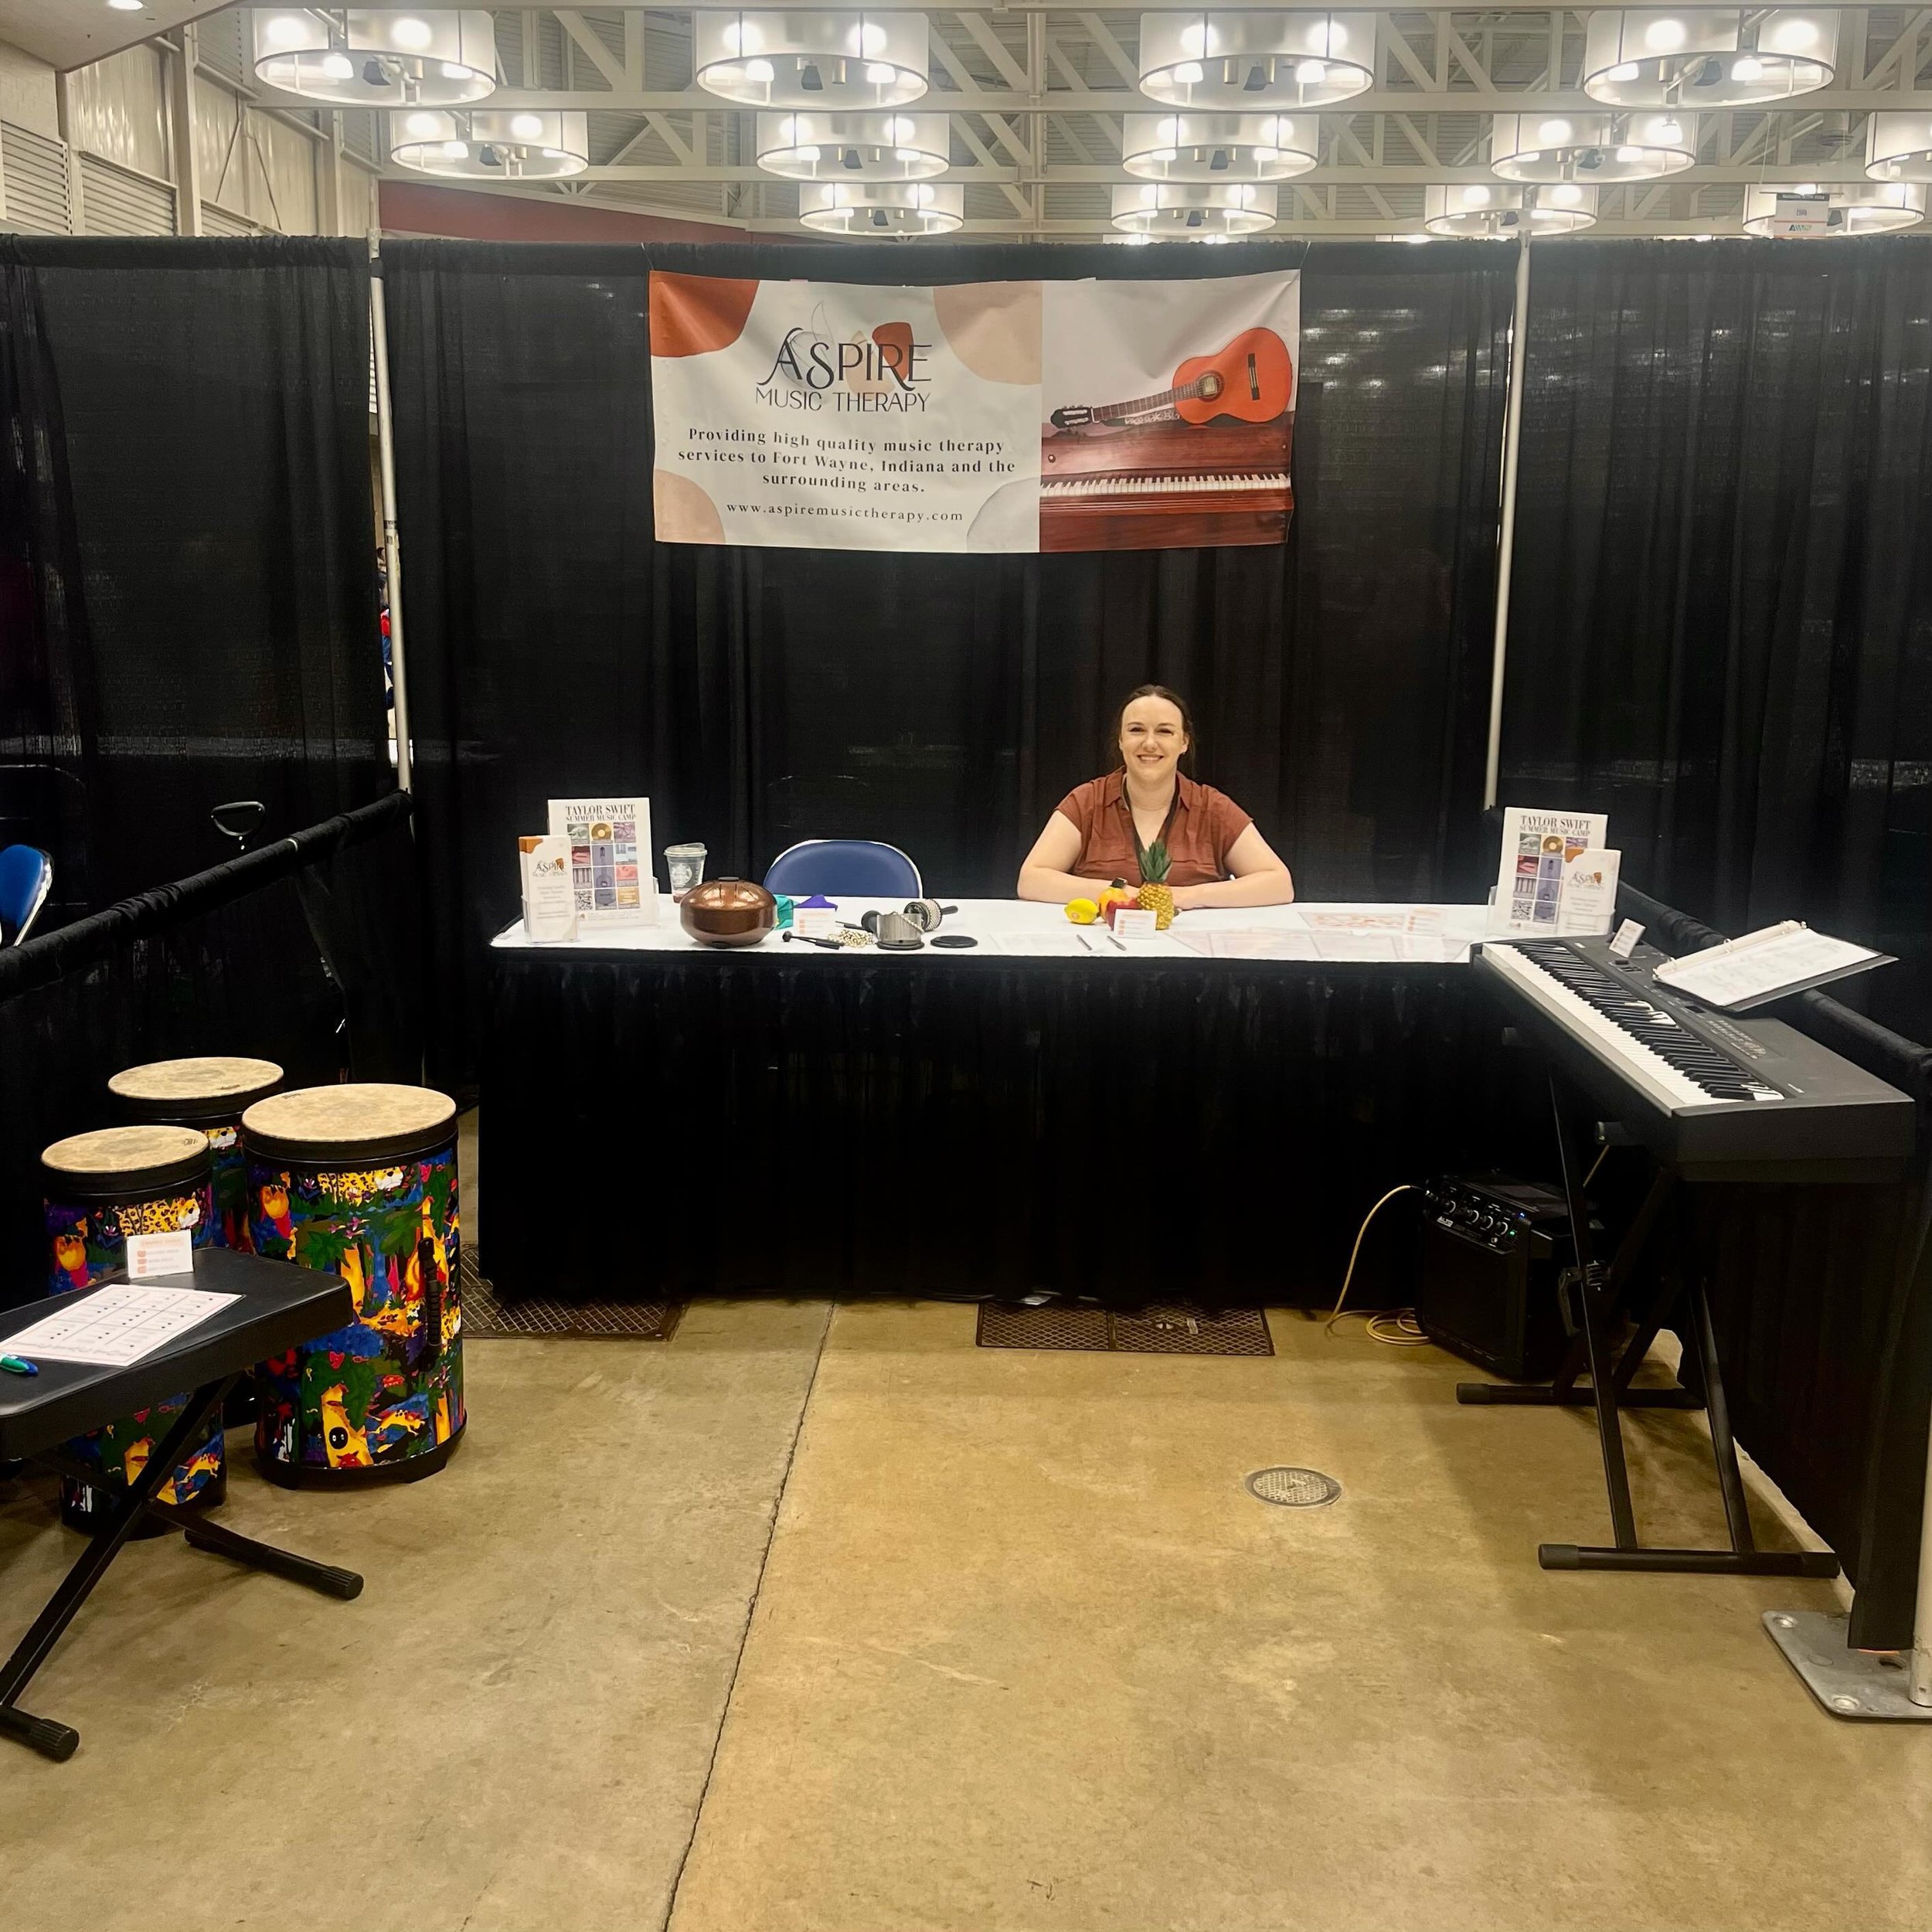 We have a booth set up at the Disability Expo today with @awsfnei until 3pm! Come visit us at booth #95 for some songwriting, instruments, and friendly faces 🎶

#DisabilityExpoFortWayne #DisabilityResources #FortWayne #FortWayneIndiana #MedicaidWaiv